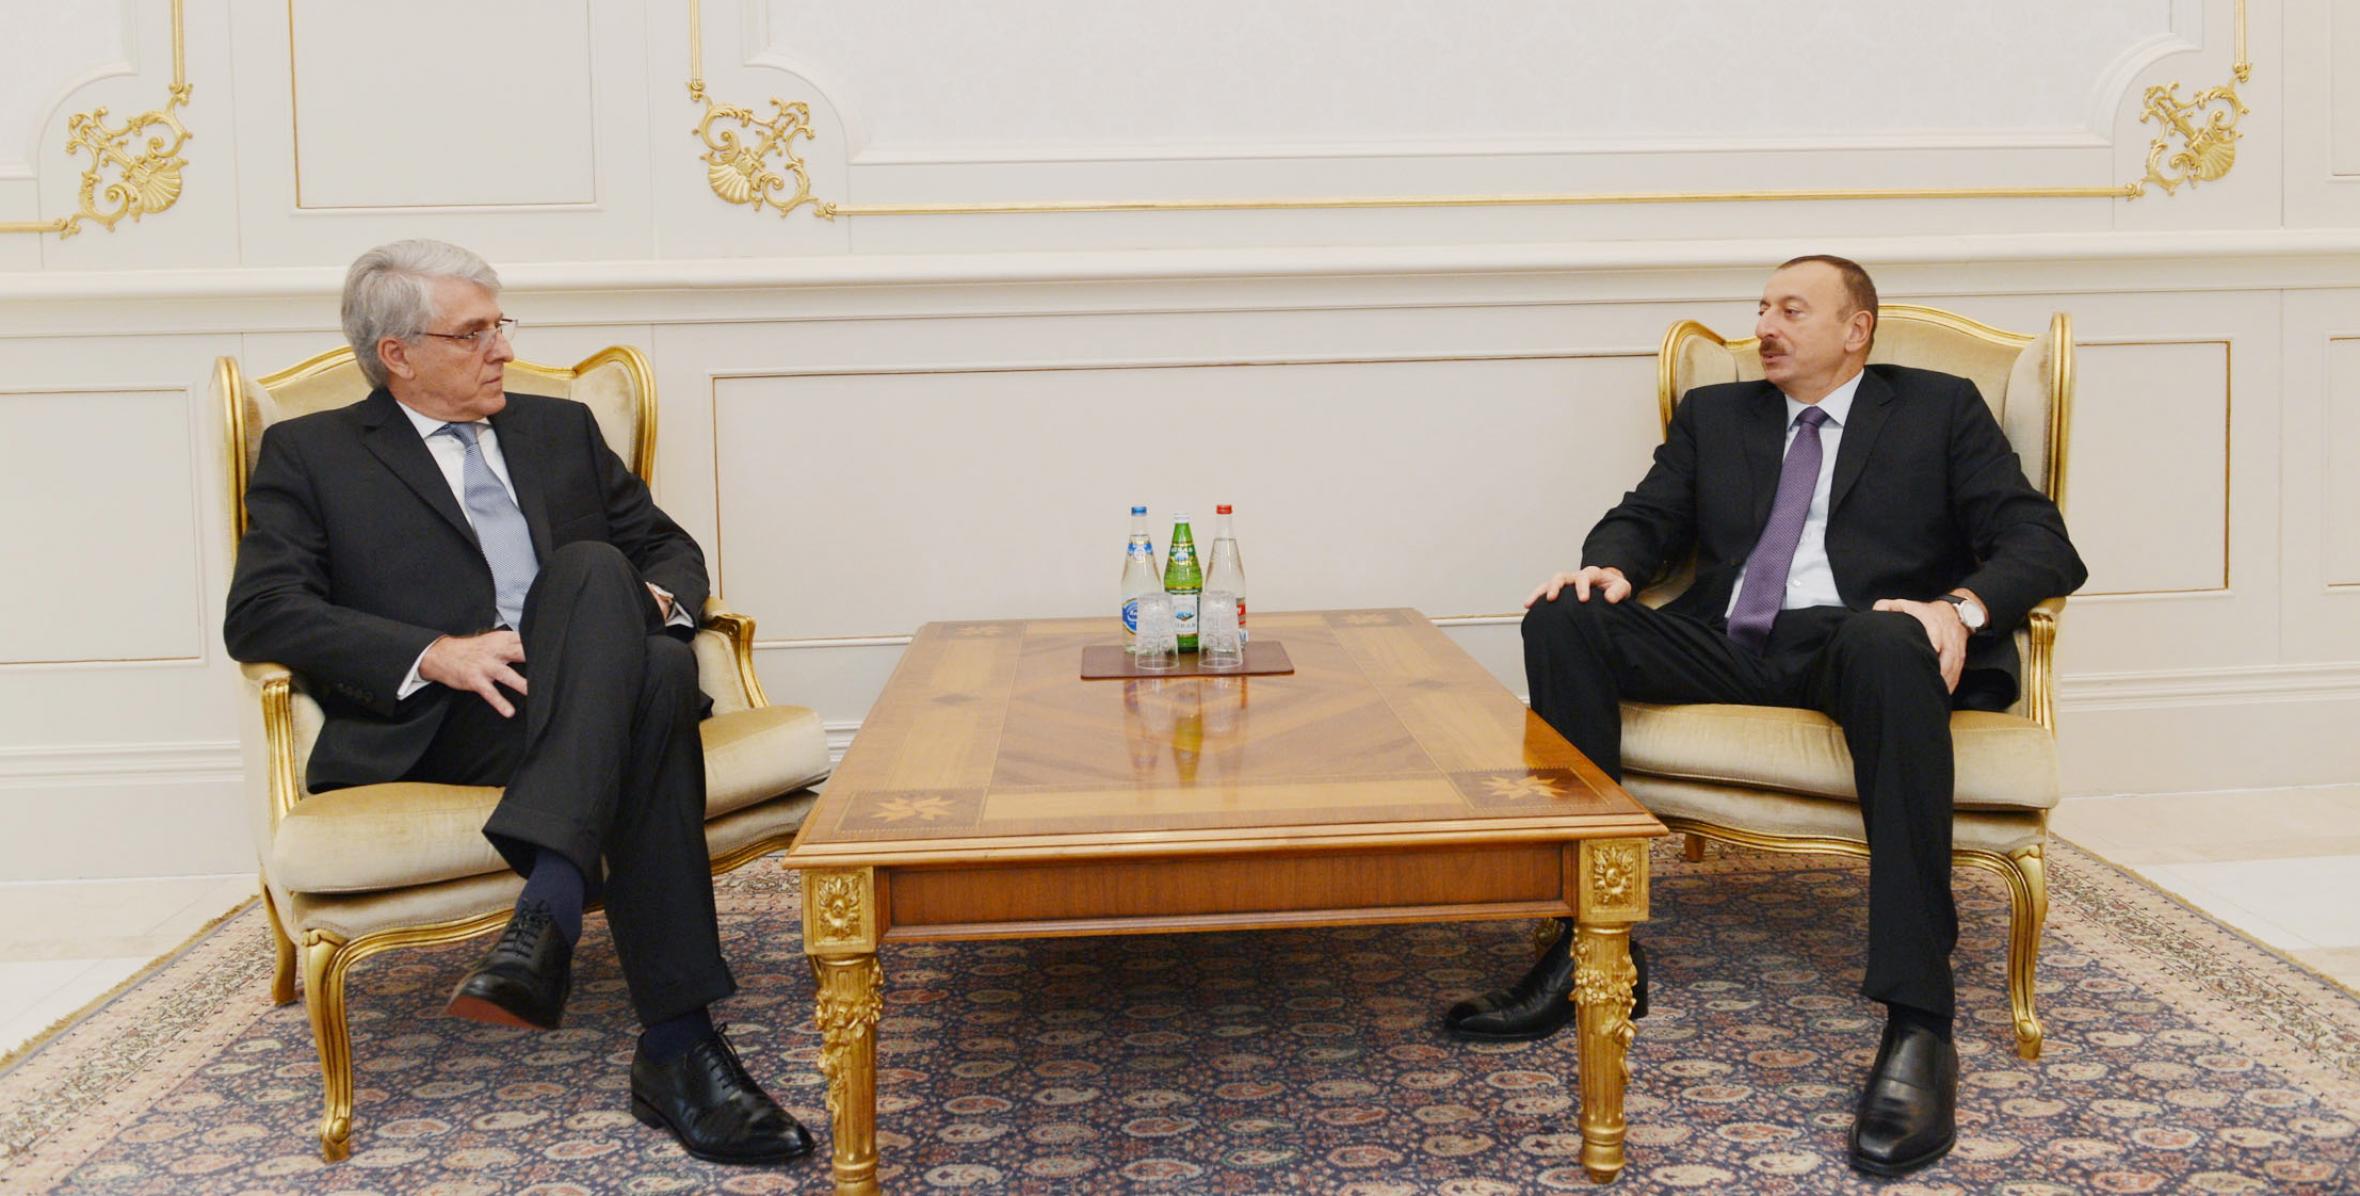 Ilham Aliyev accepted the credentials of the newly appointed Ambassador of Argentina to Azerbaijan